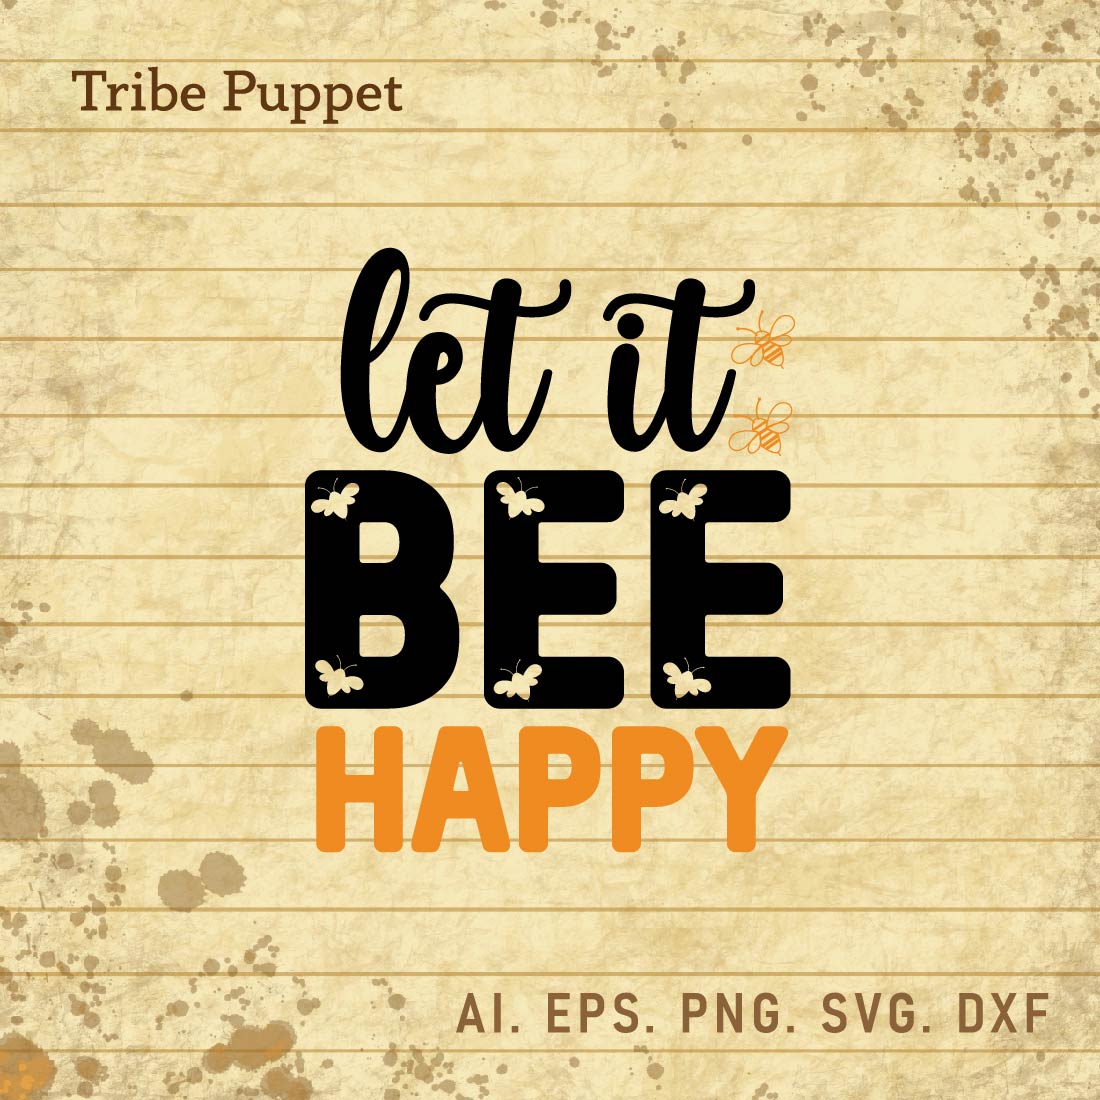 Bee Quotes cover image.